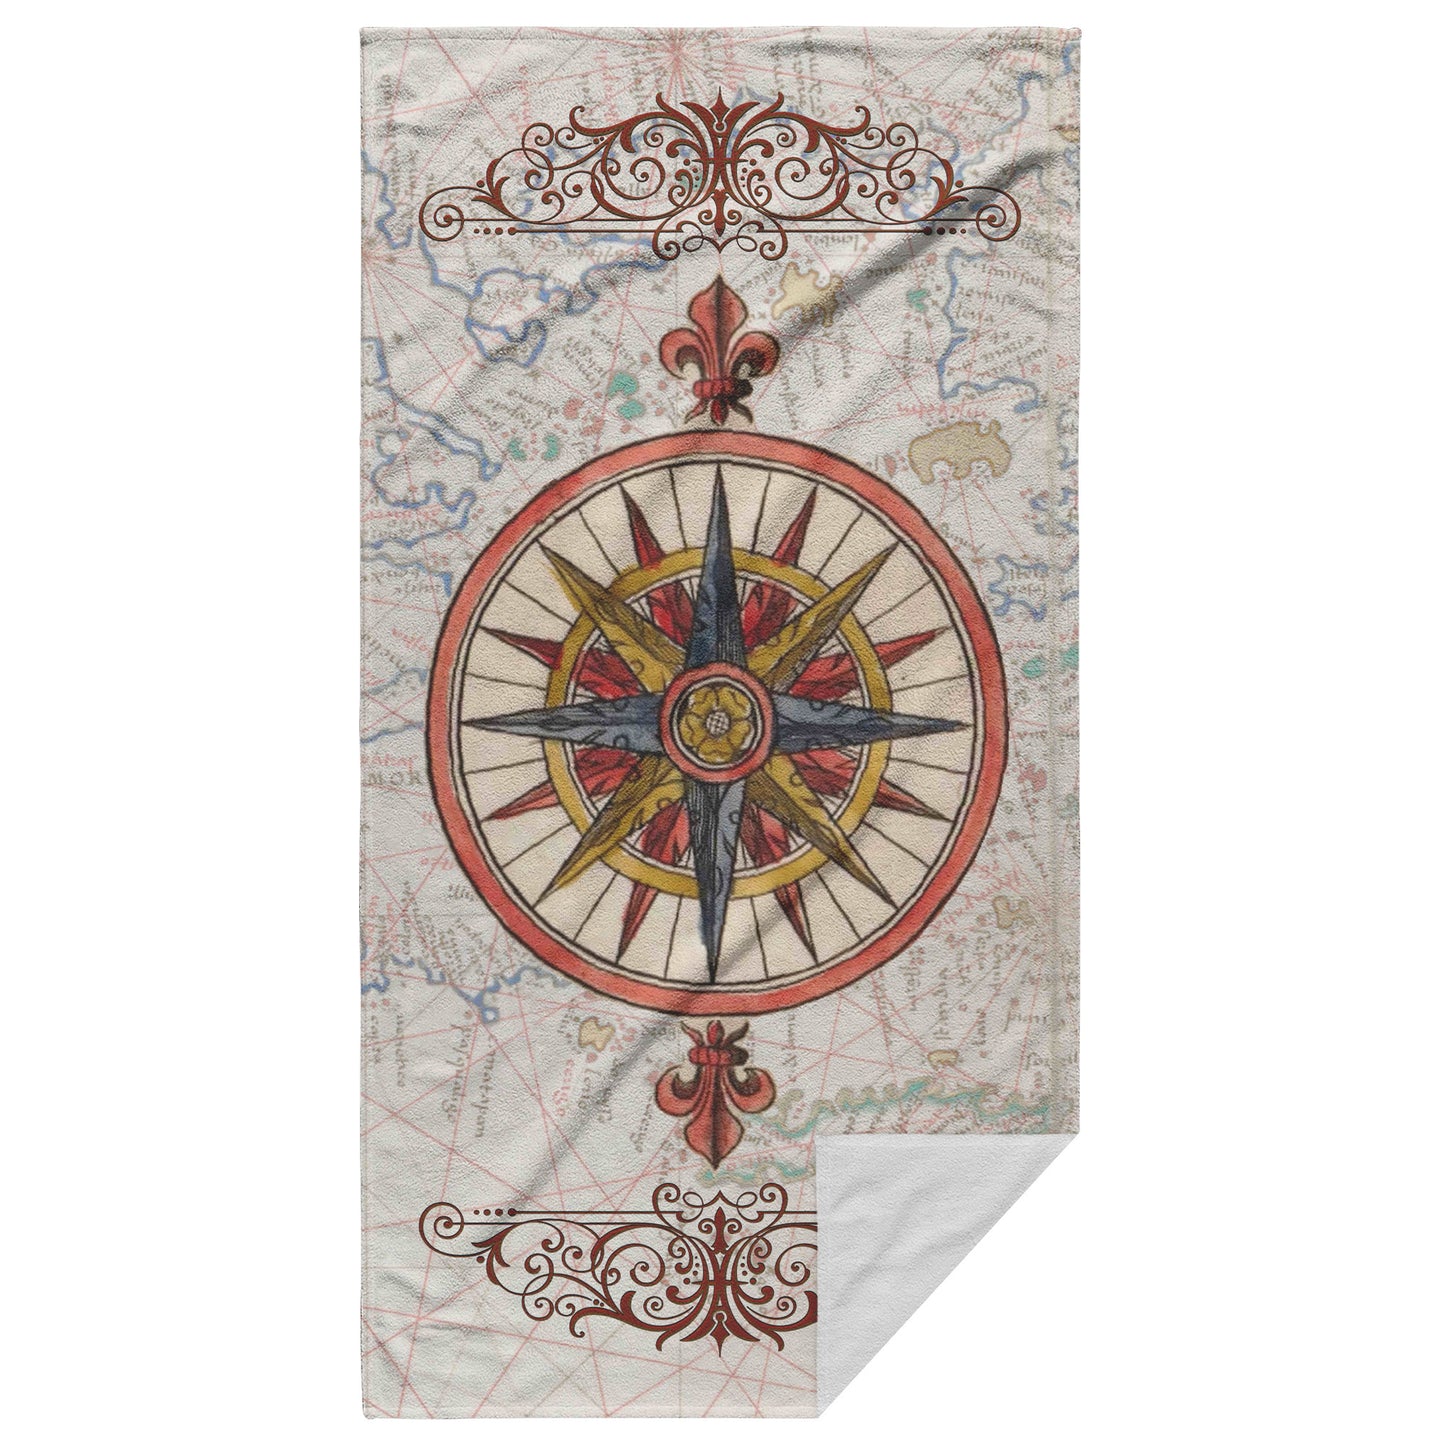 Compass Rose Beach Towel - Bright Red